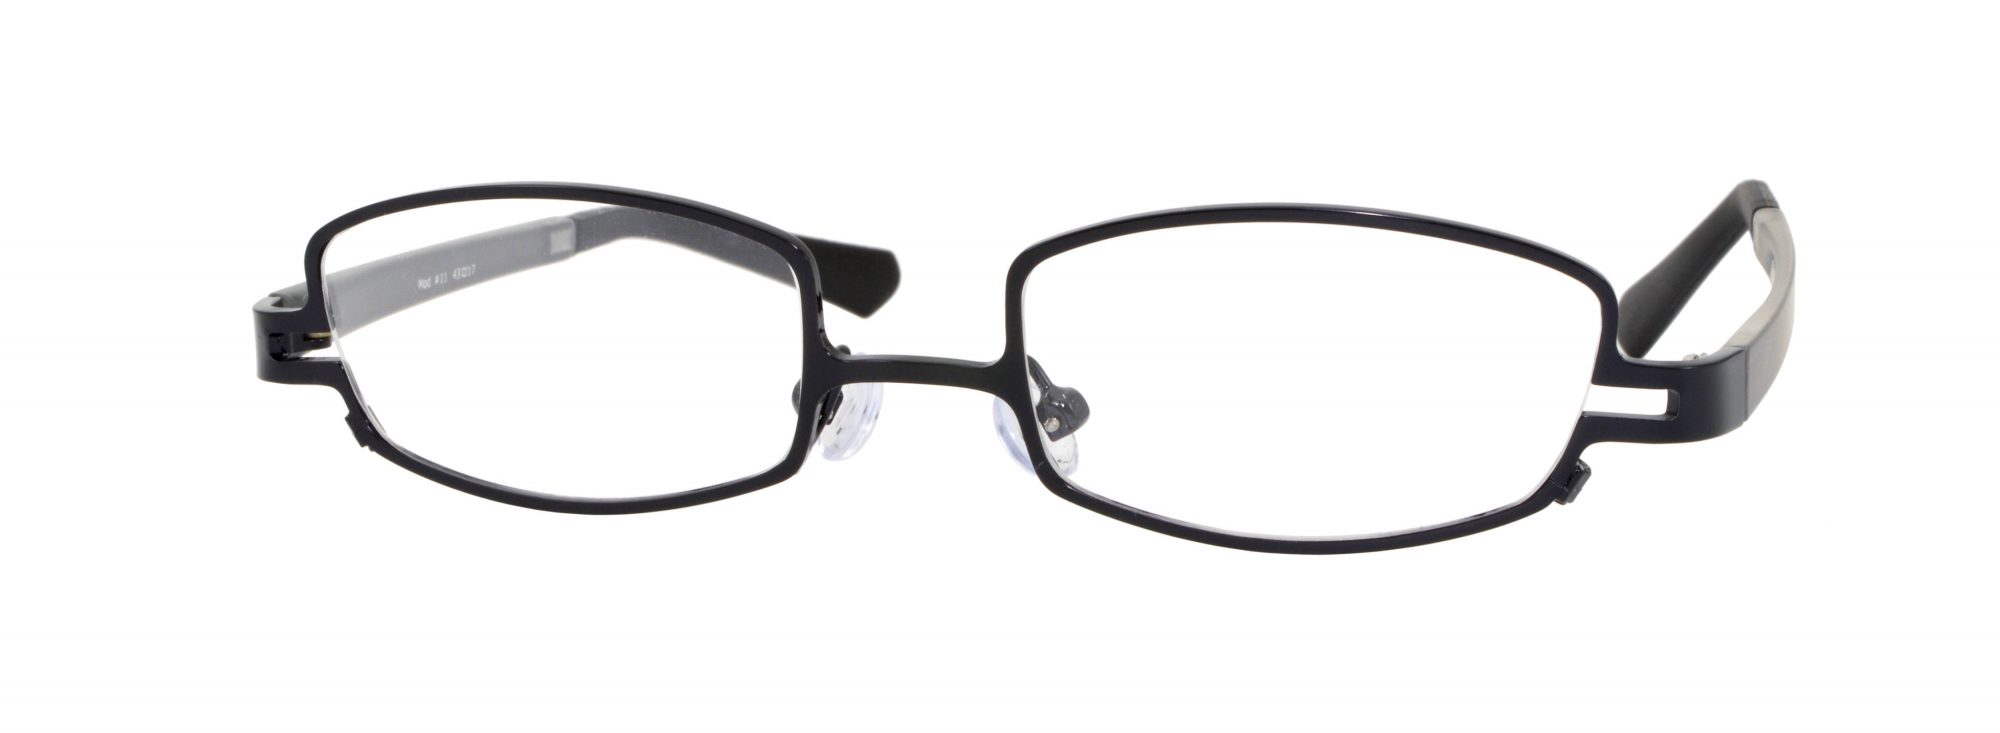 Erin's World frame style number EW-11 in shiny black